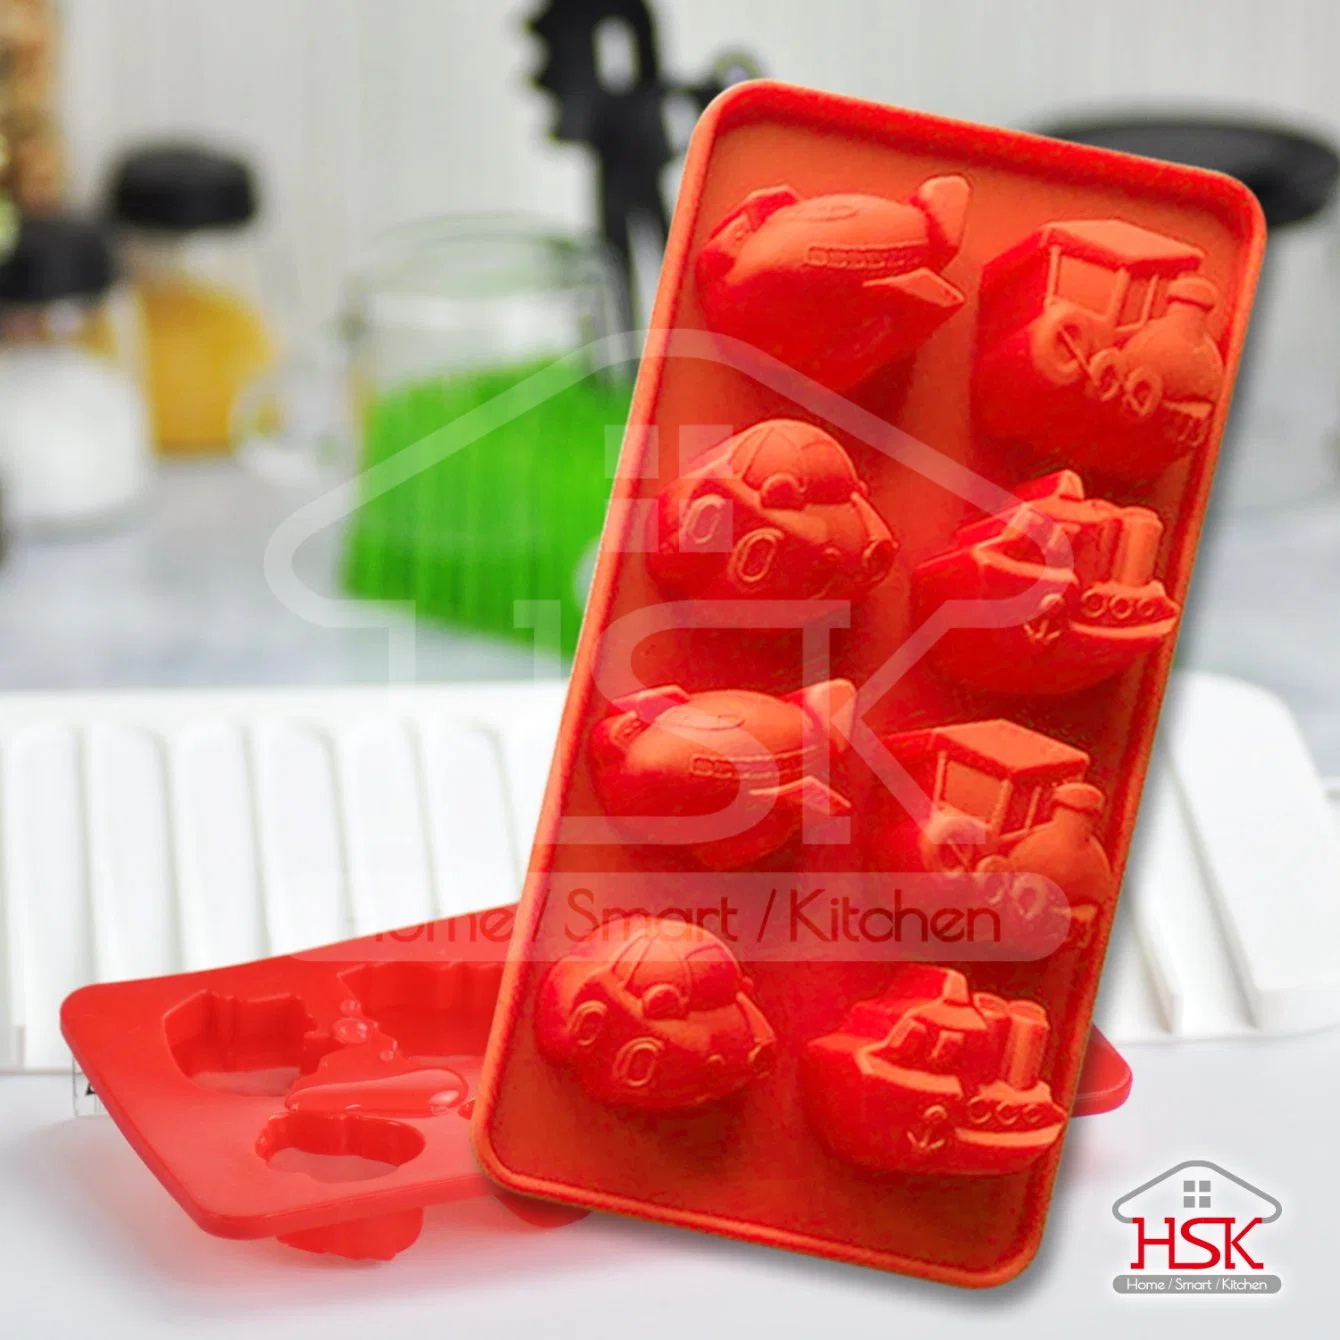 Silicone Ice Cube Tray/Maker/Mold with Transportation Patterns Easy Release